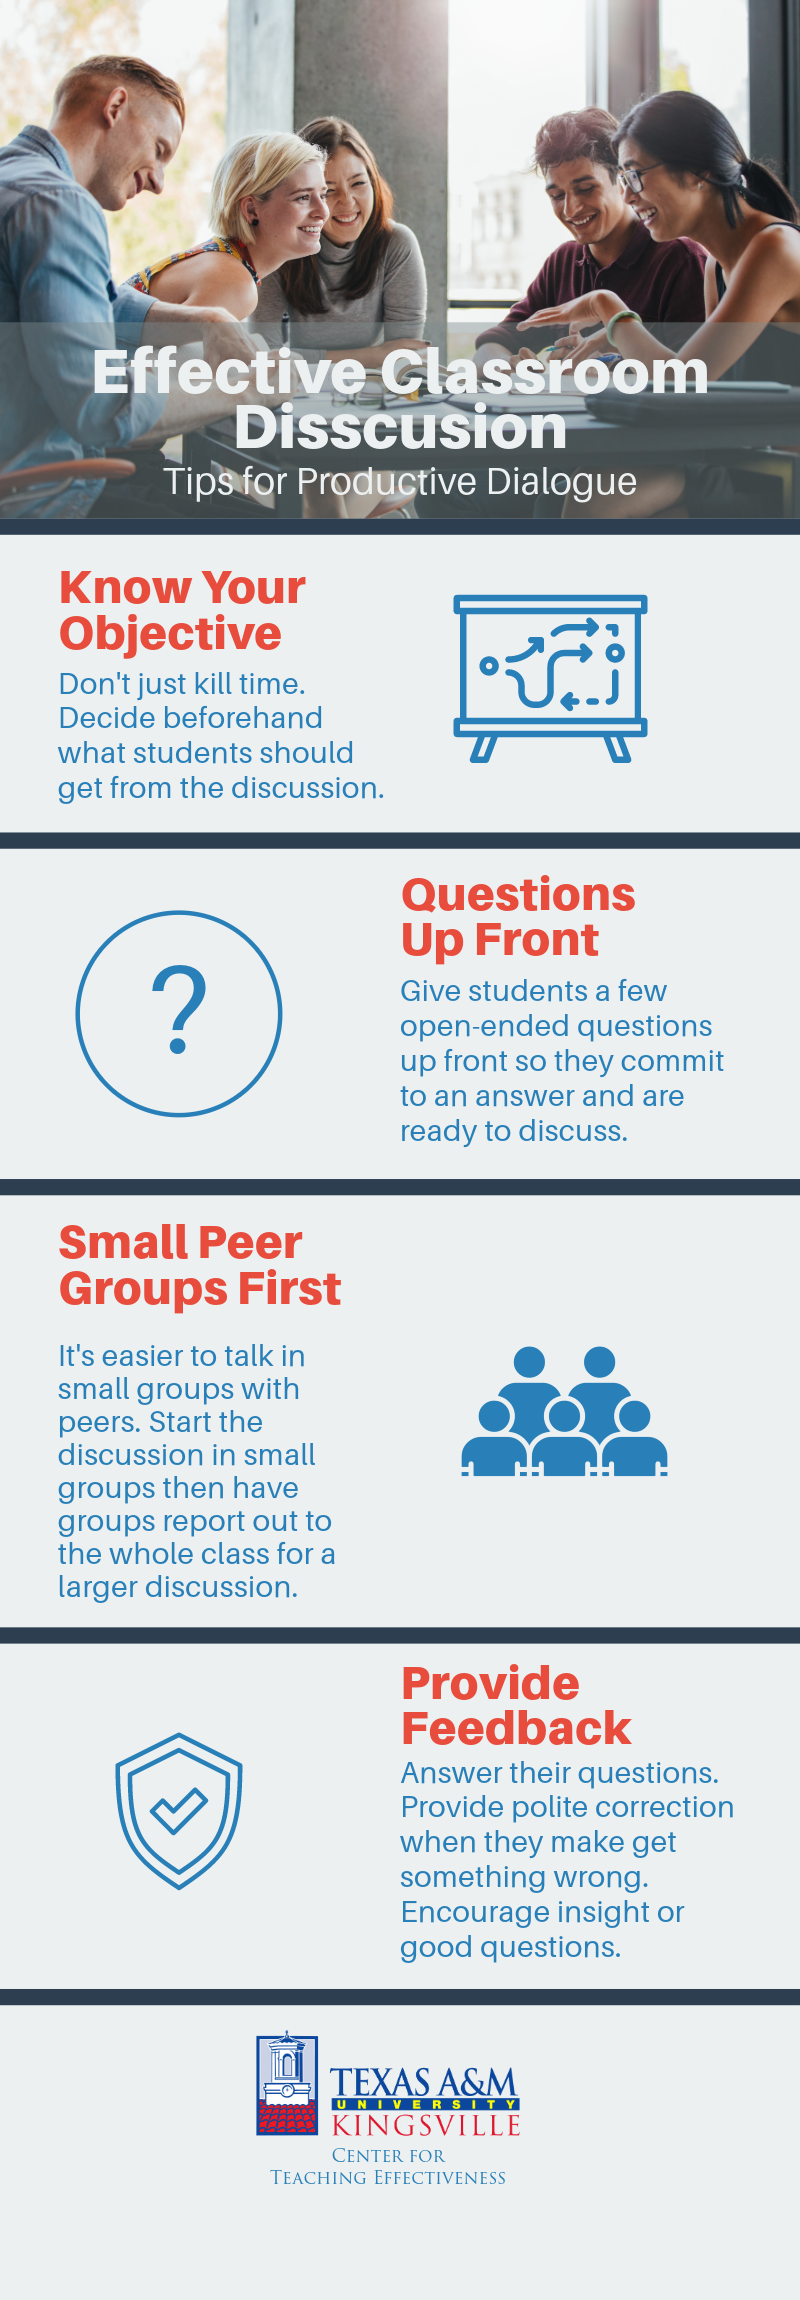 Effective Classroom Discussion